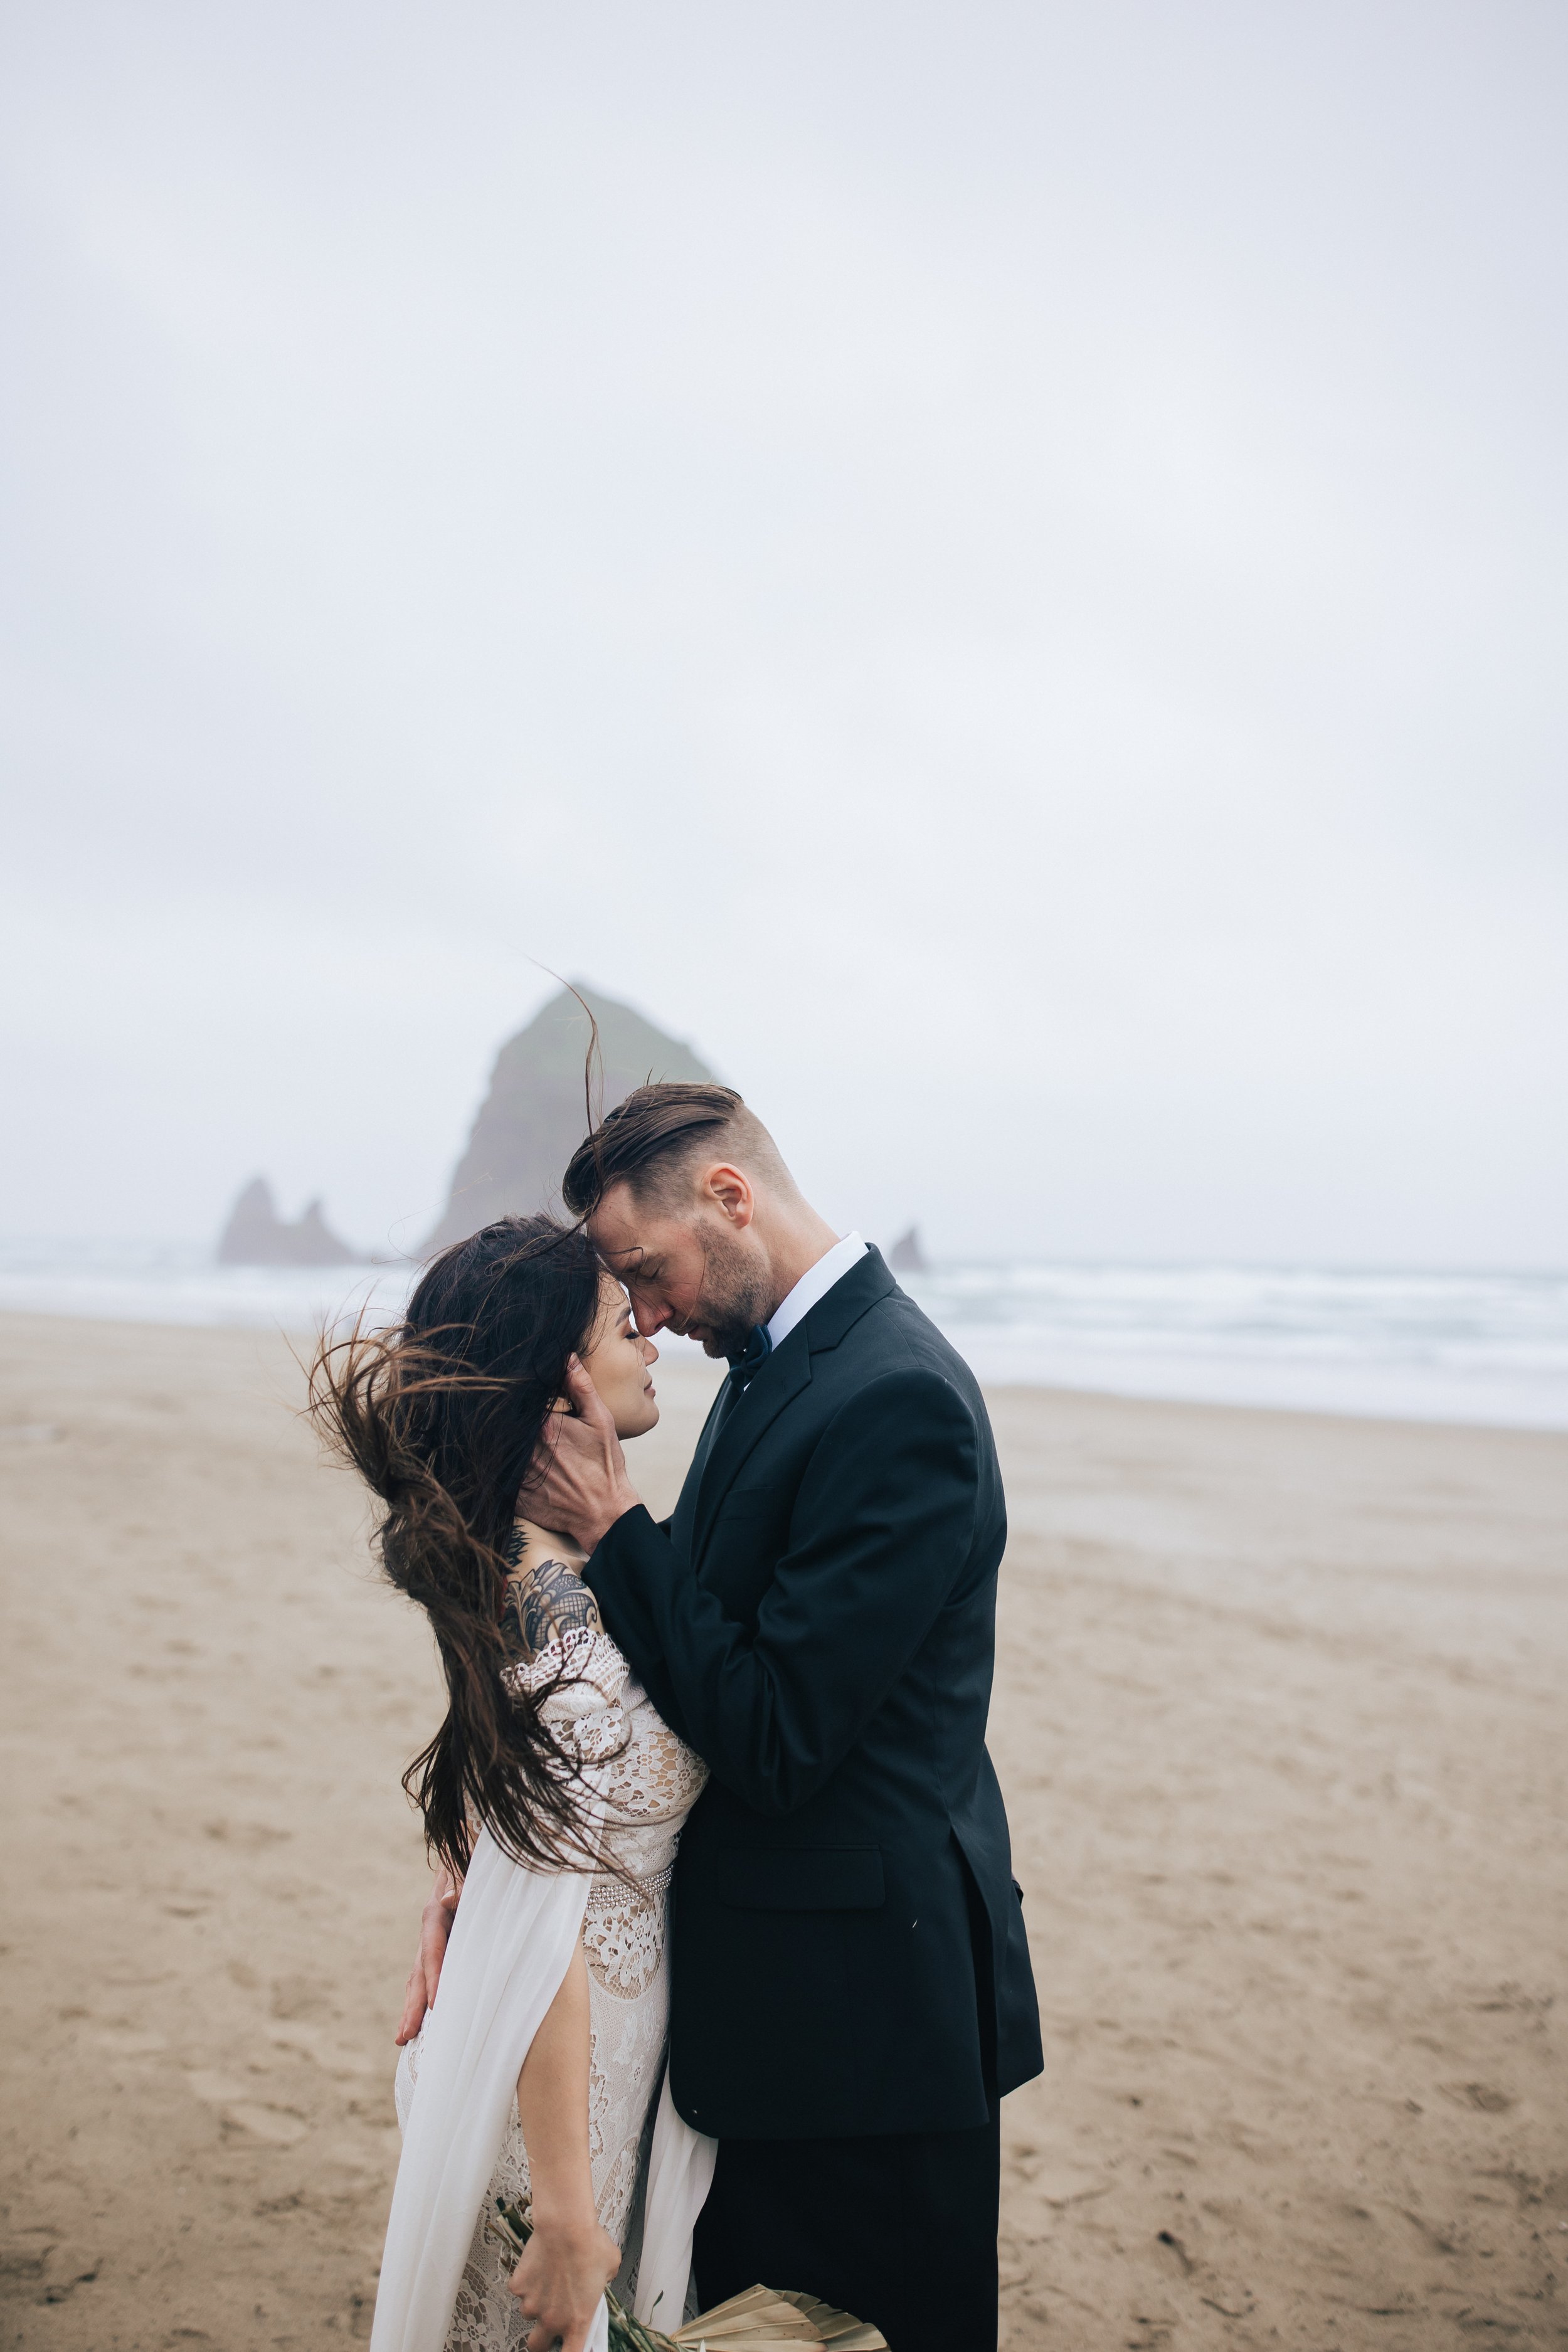  stunning elopement photography by emily jenkins photo in oregon cannon beach elopement photographer elope to Oregon how to elope in seaside OR sandy beach wedding photos boho wedding dress boho elopement in oregon #pnw #pnwwedding #pnwelopement #can